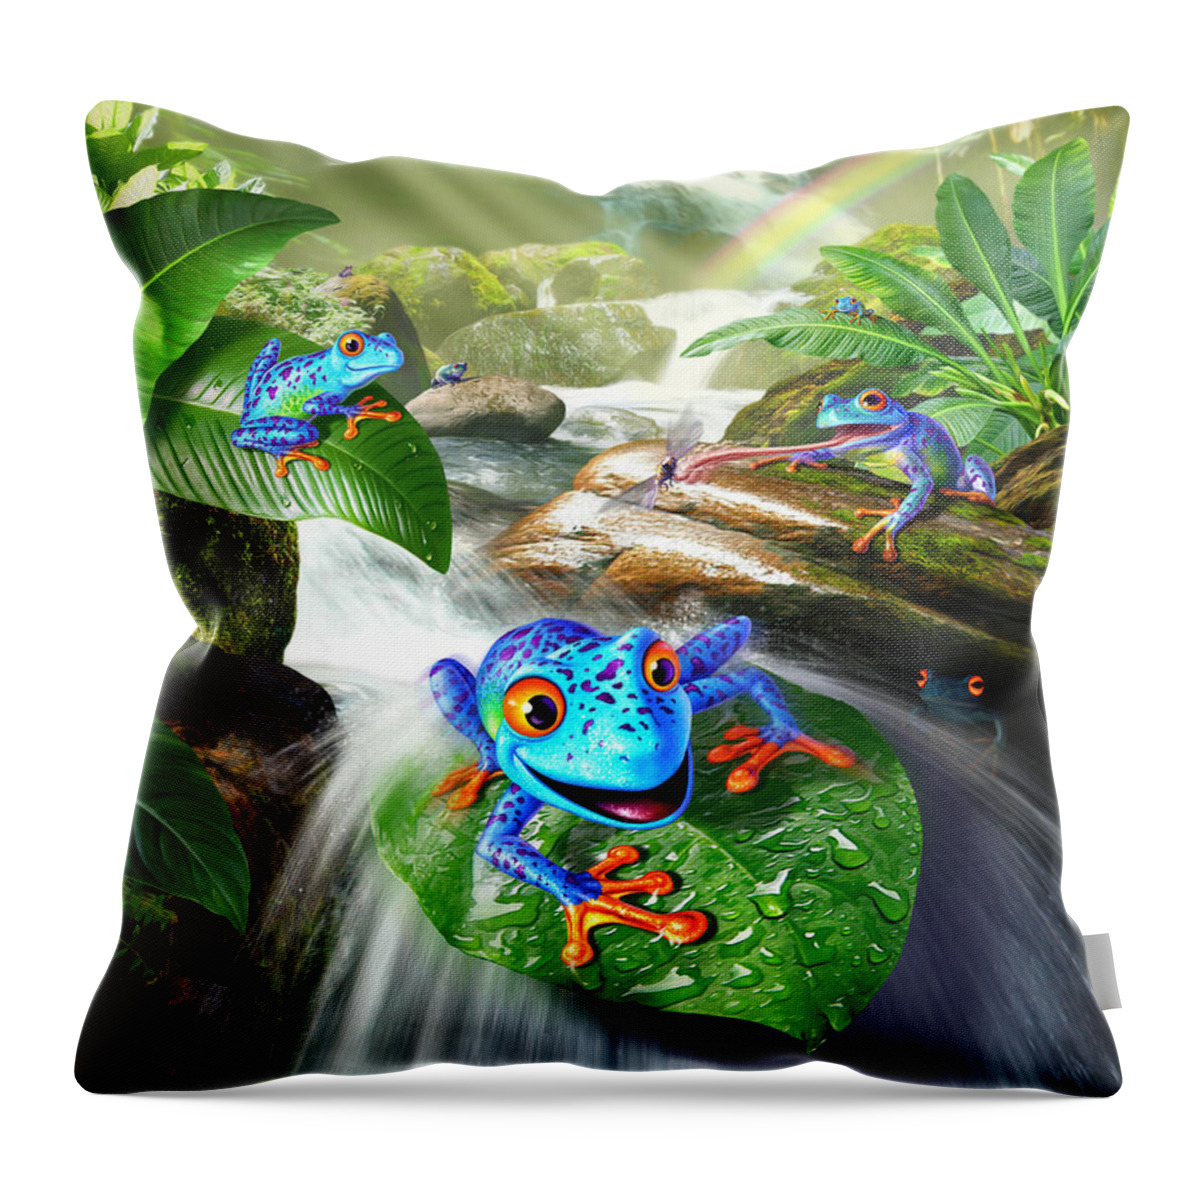 Frogs Throw Pillow featuring the digital art Frog Capades by Jerry LoFaro